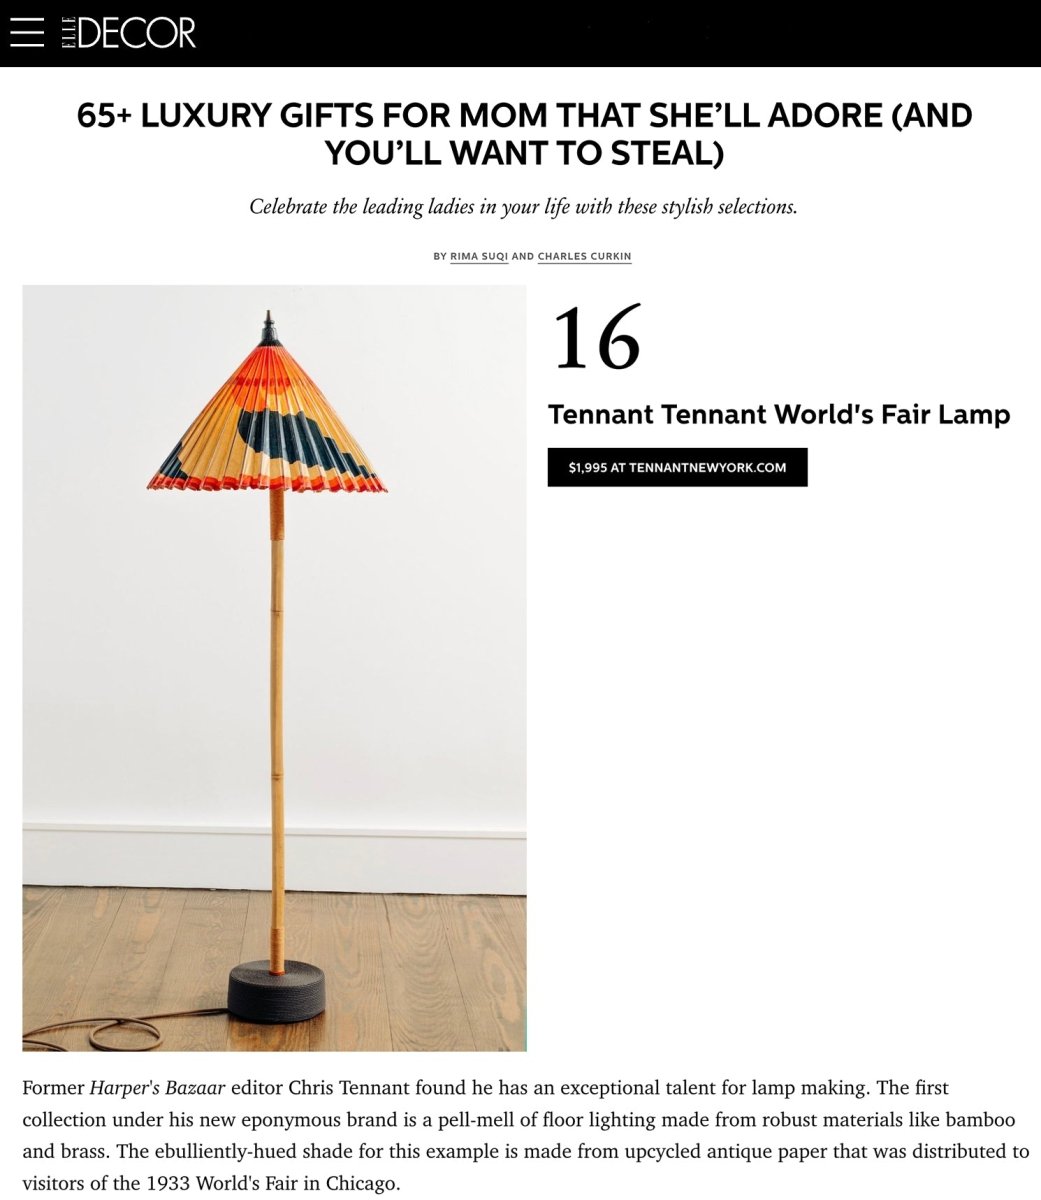 1933 Chicago 'World’s Fair' Bamboo Floor Lamp with Parasol Shade and Coiled Seagrass Base — Model No. 001 - Tennant New York